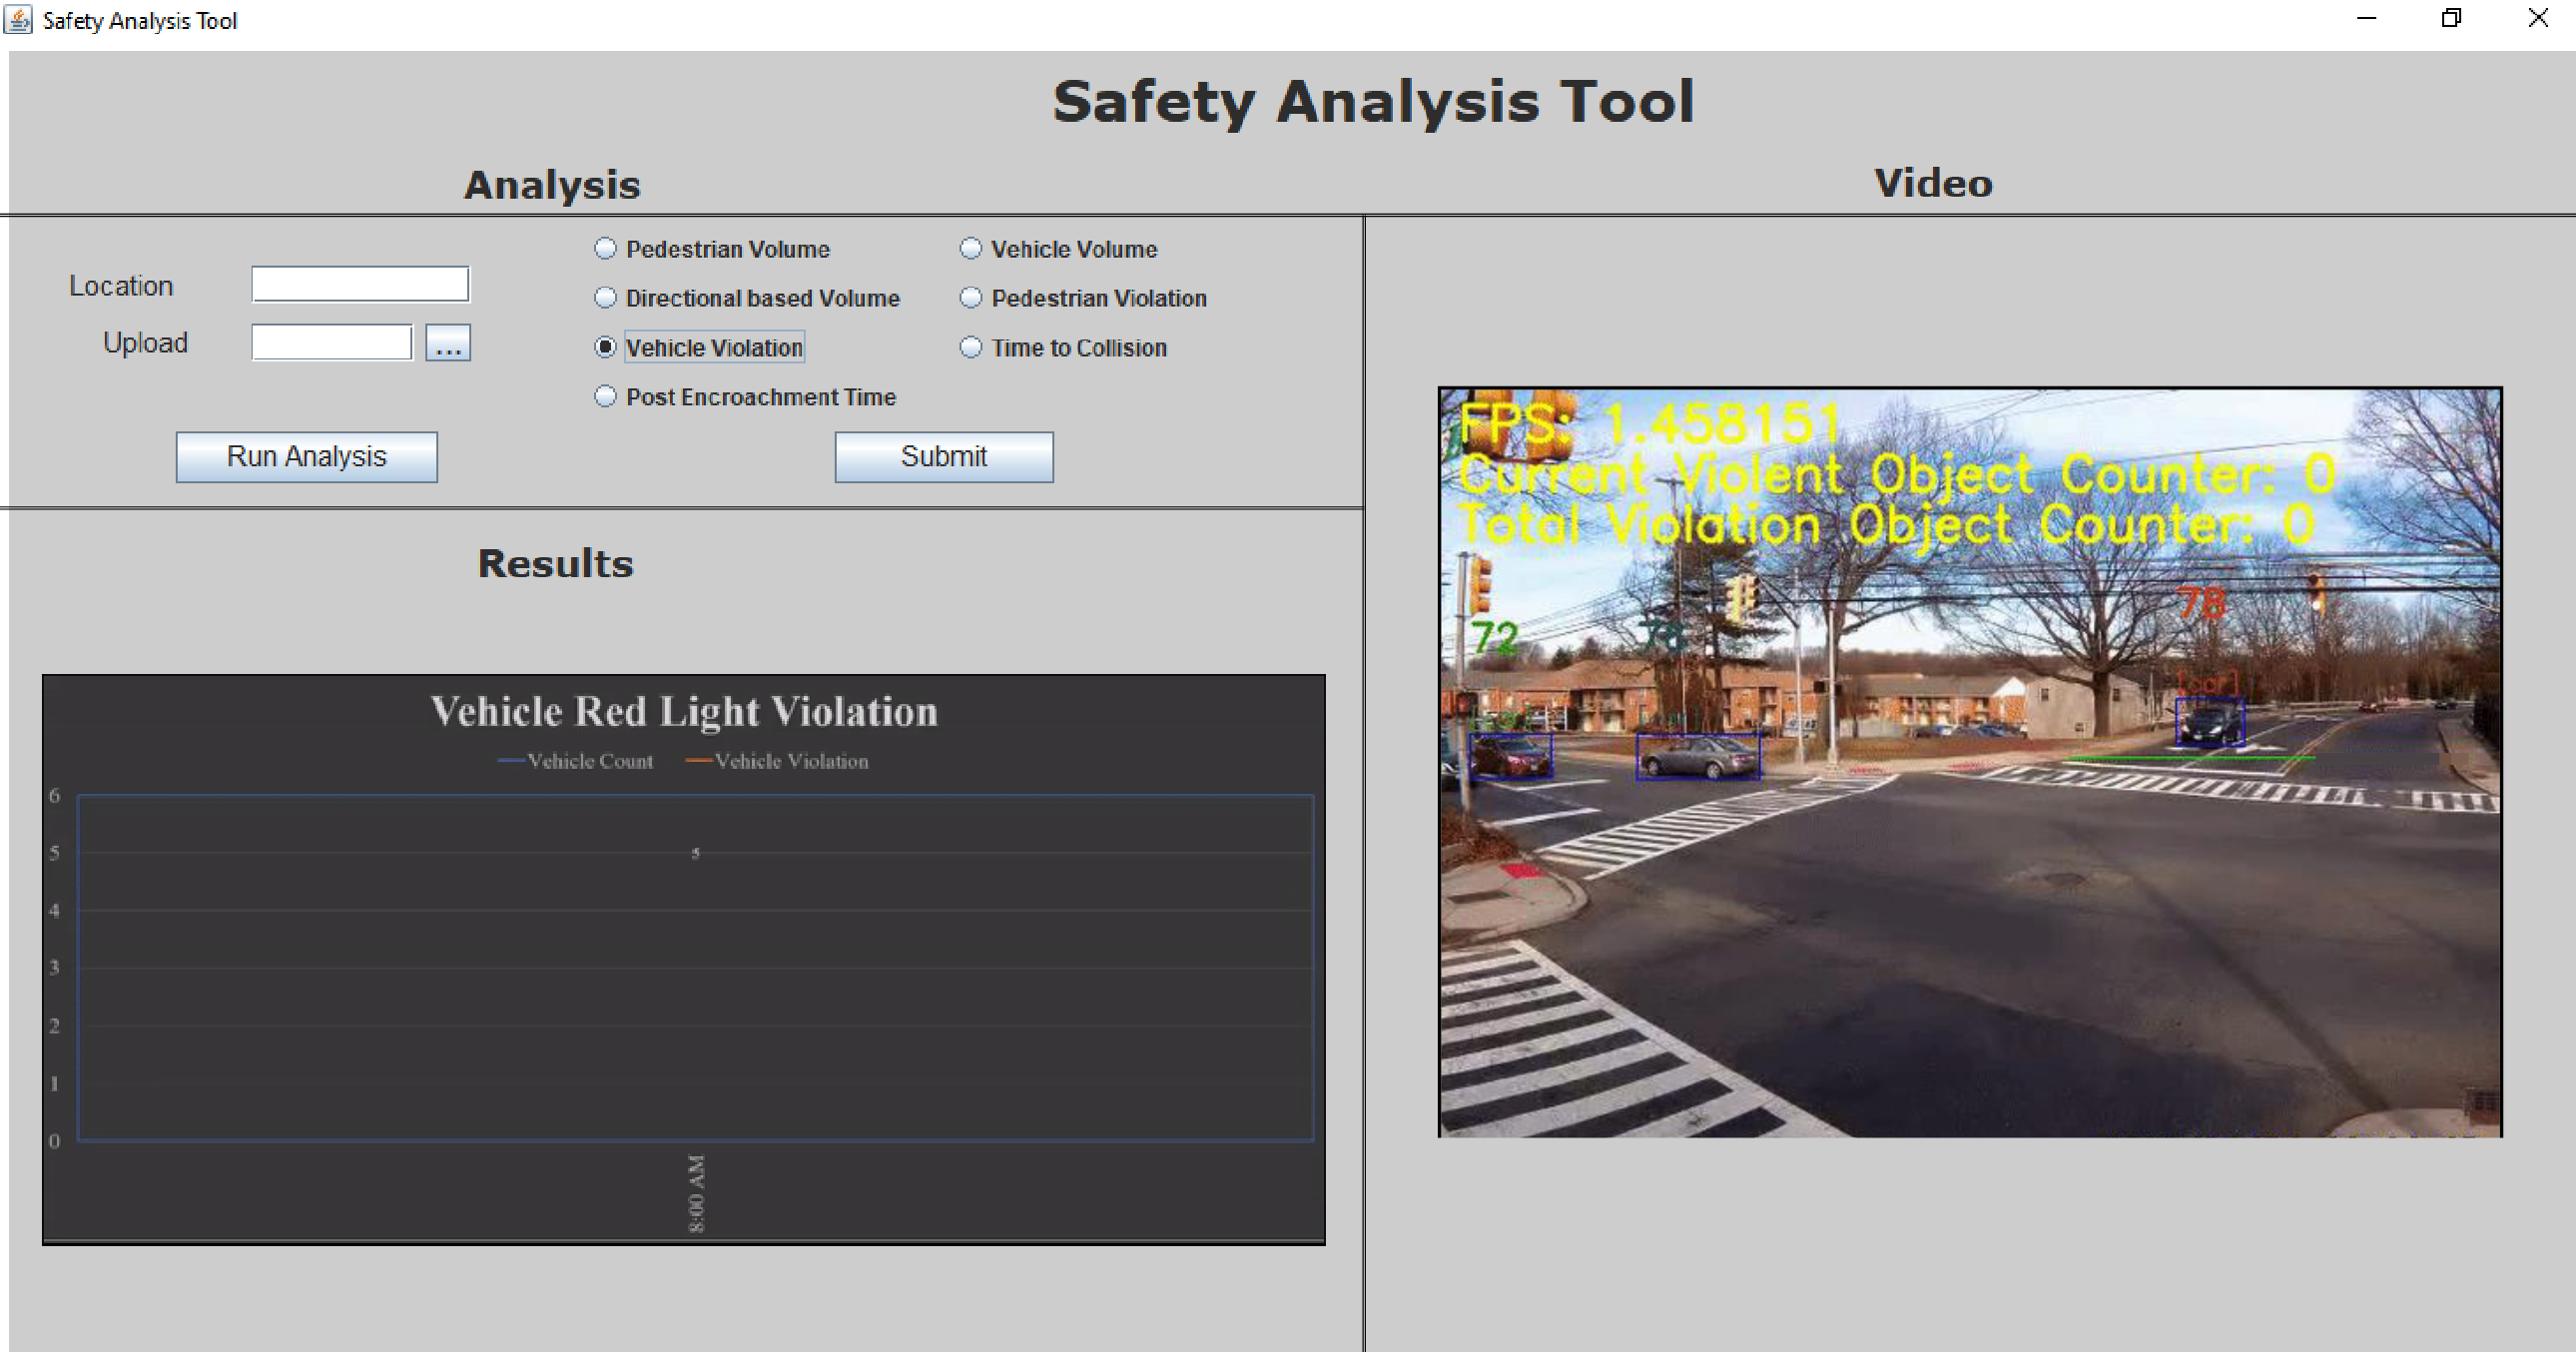 Image of Safety Analysis Tool interactive box with parts that read Analysis and Video, with Results, such as Vehicle Red Light Violation